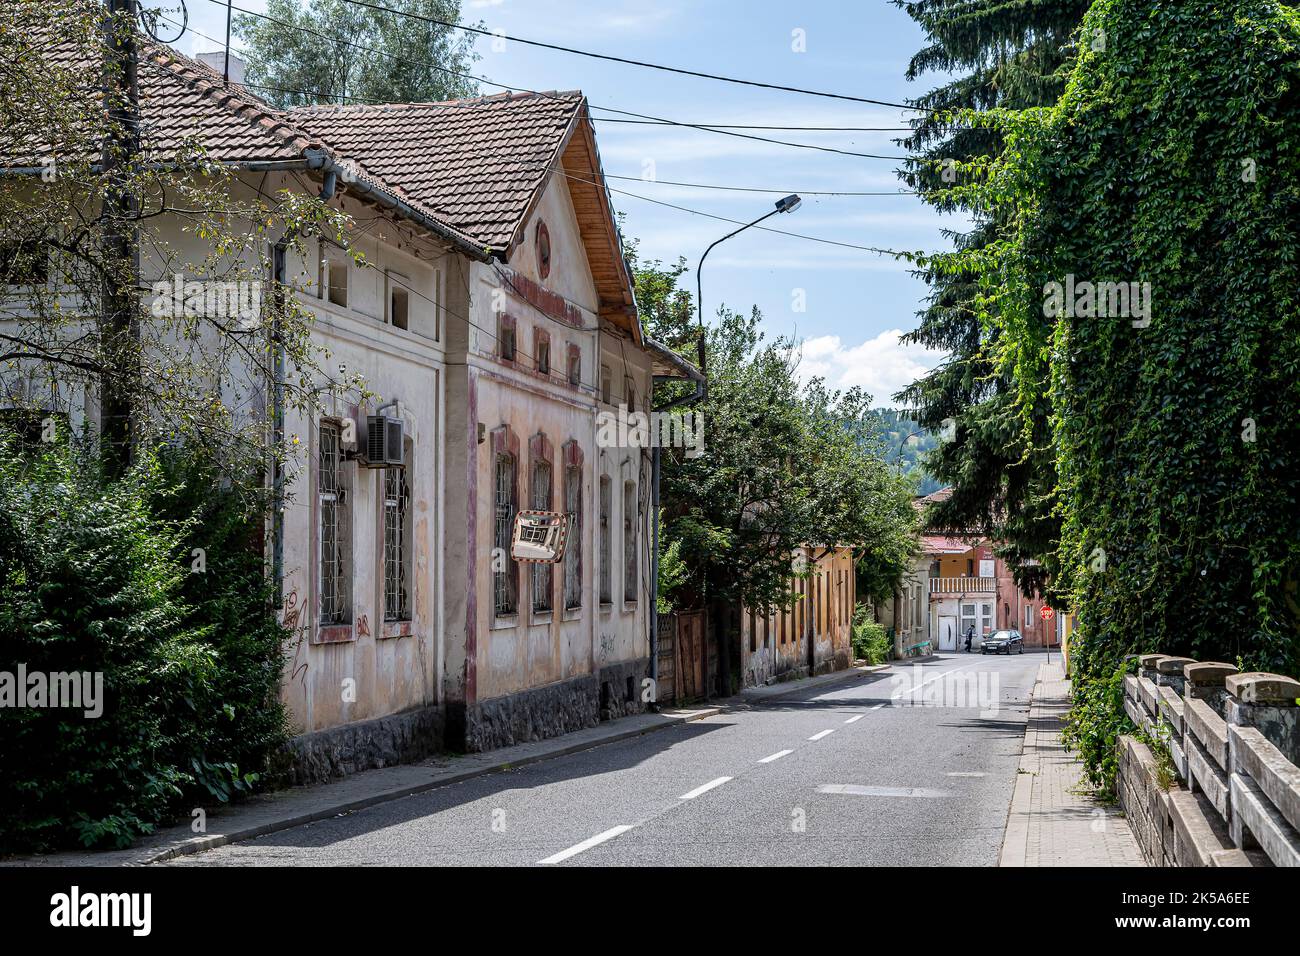 Old building in downtown on July 11, 2021 in Petrosani, Romania. Stock Photo